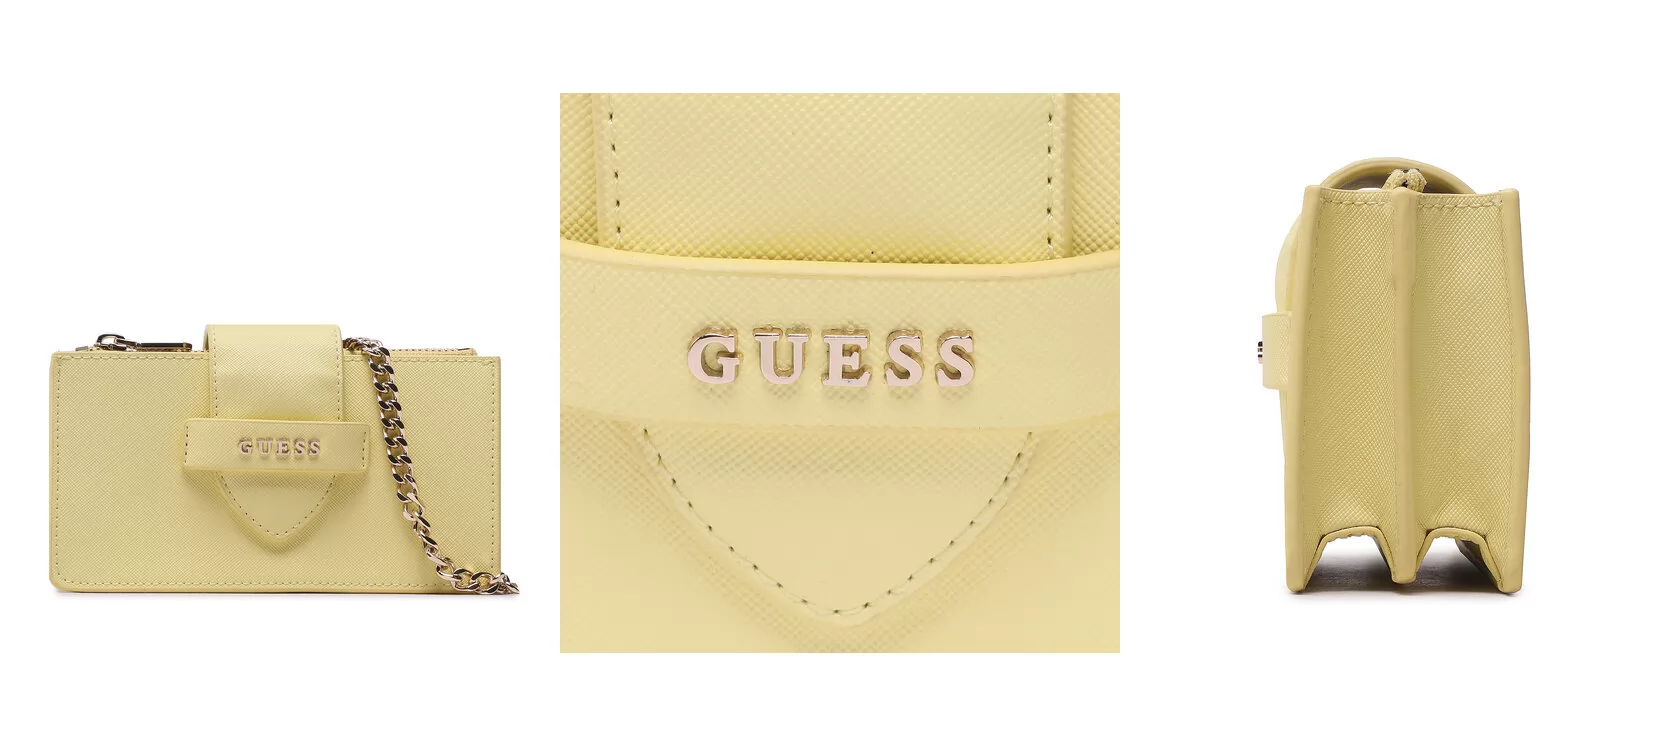 Guess Torebka Not Coordinated Accessories PW1518 P3135 Żółty